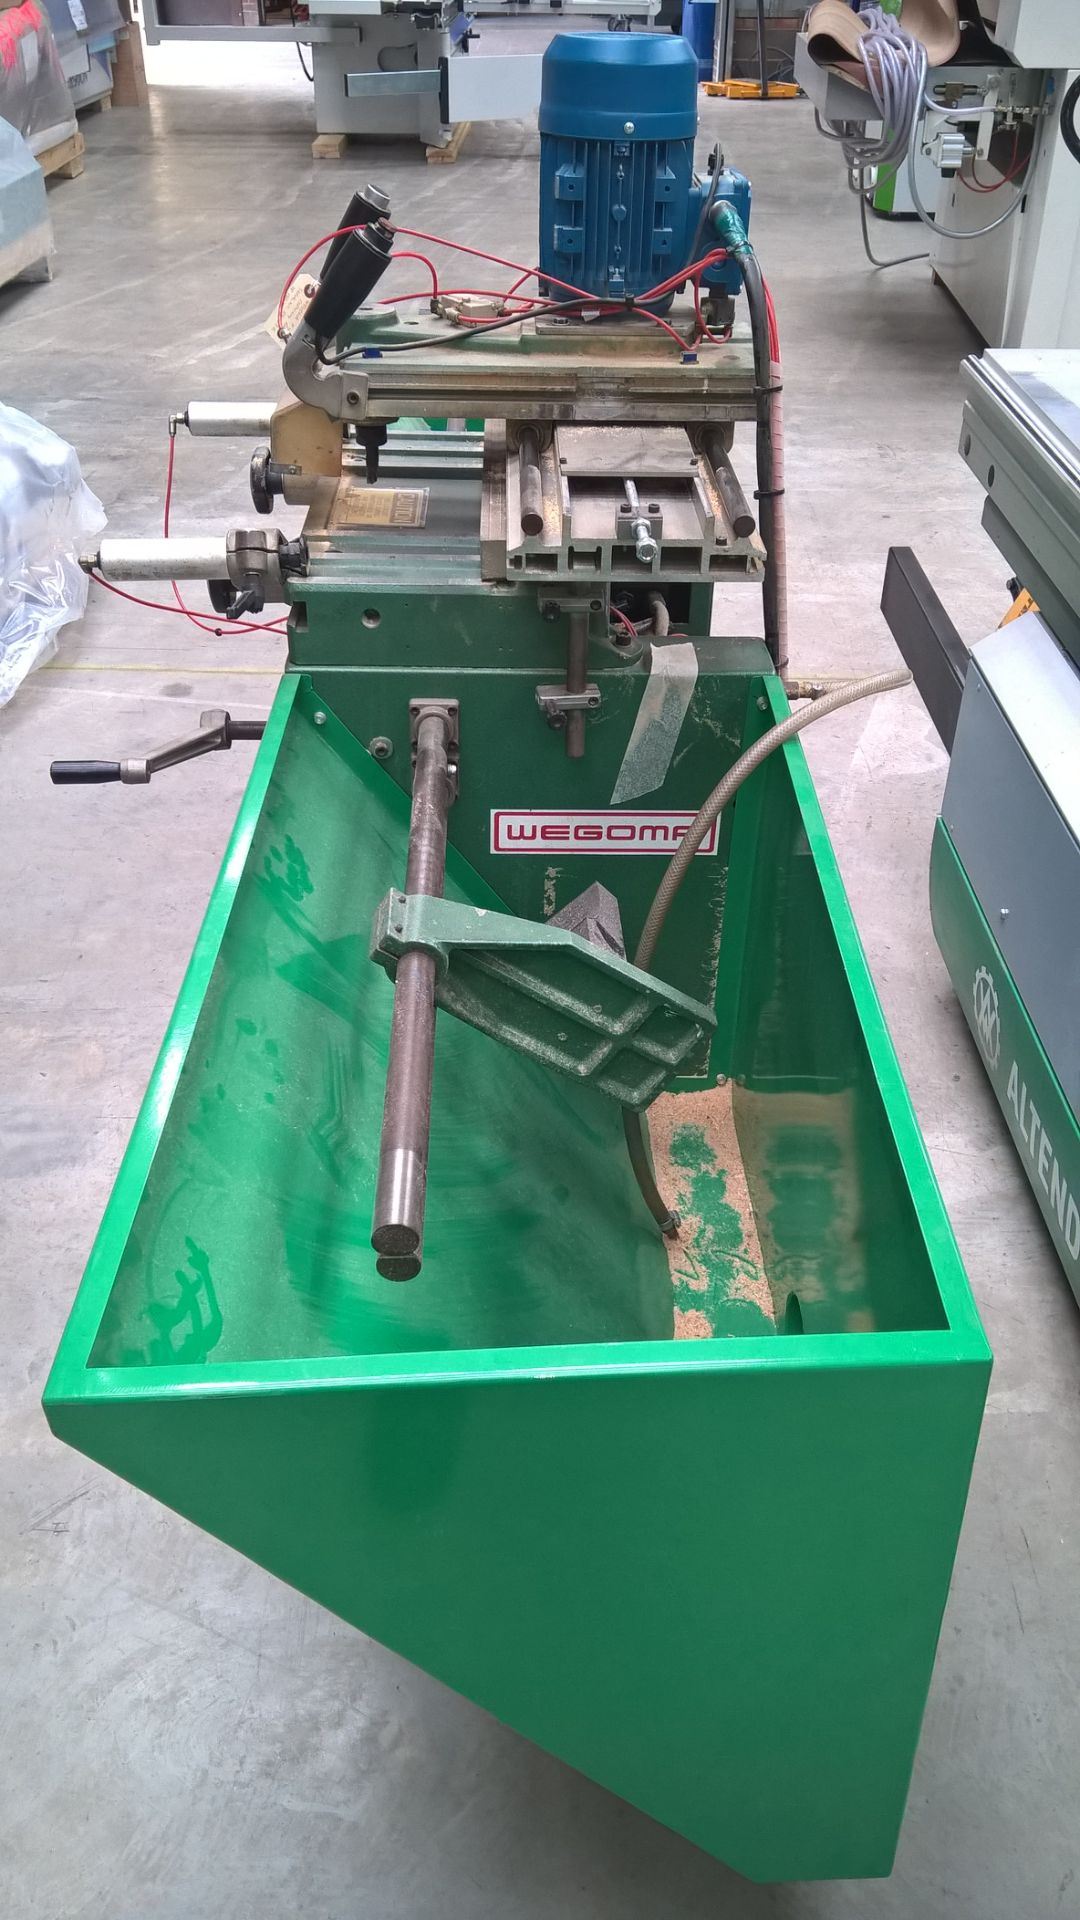 Weima Routing machine Model F102/S Serial No. 29053B Year 1997 440v. - Image 3 of 5